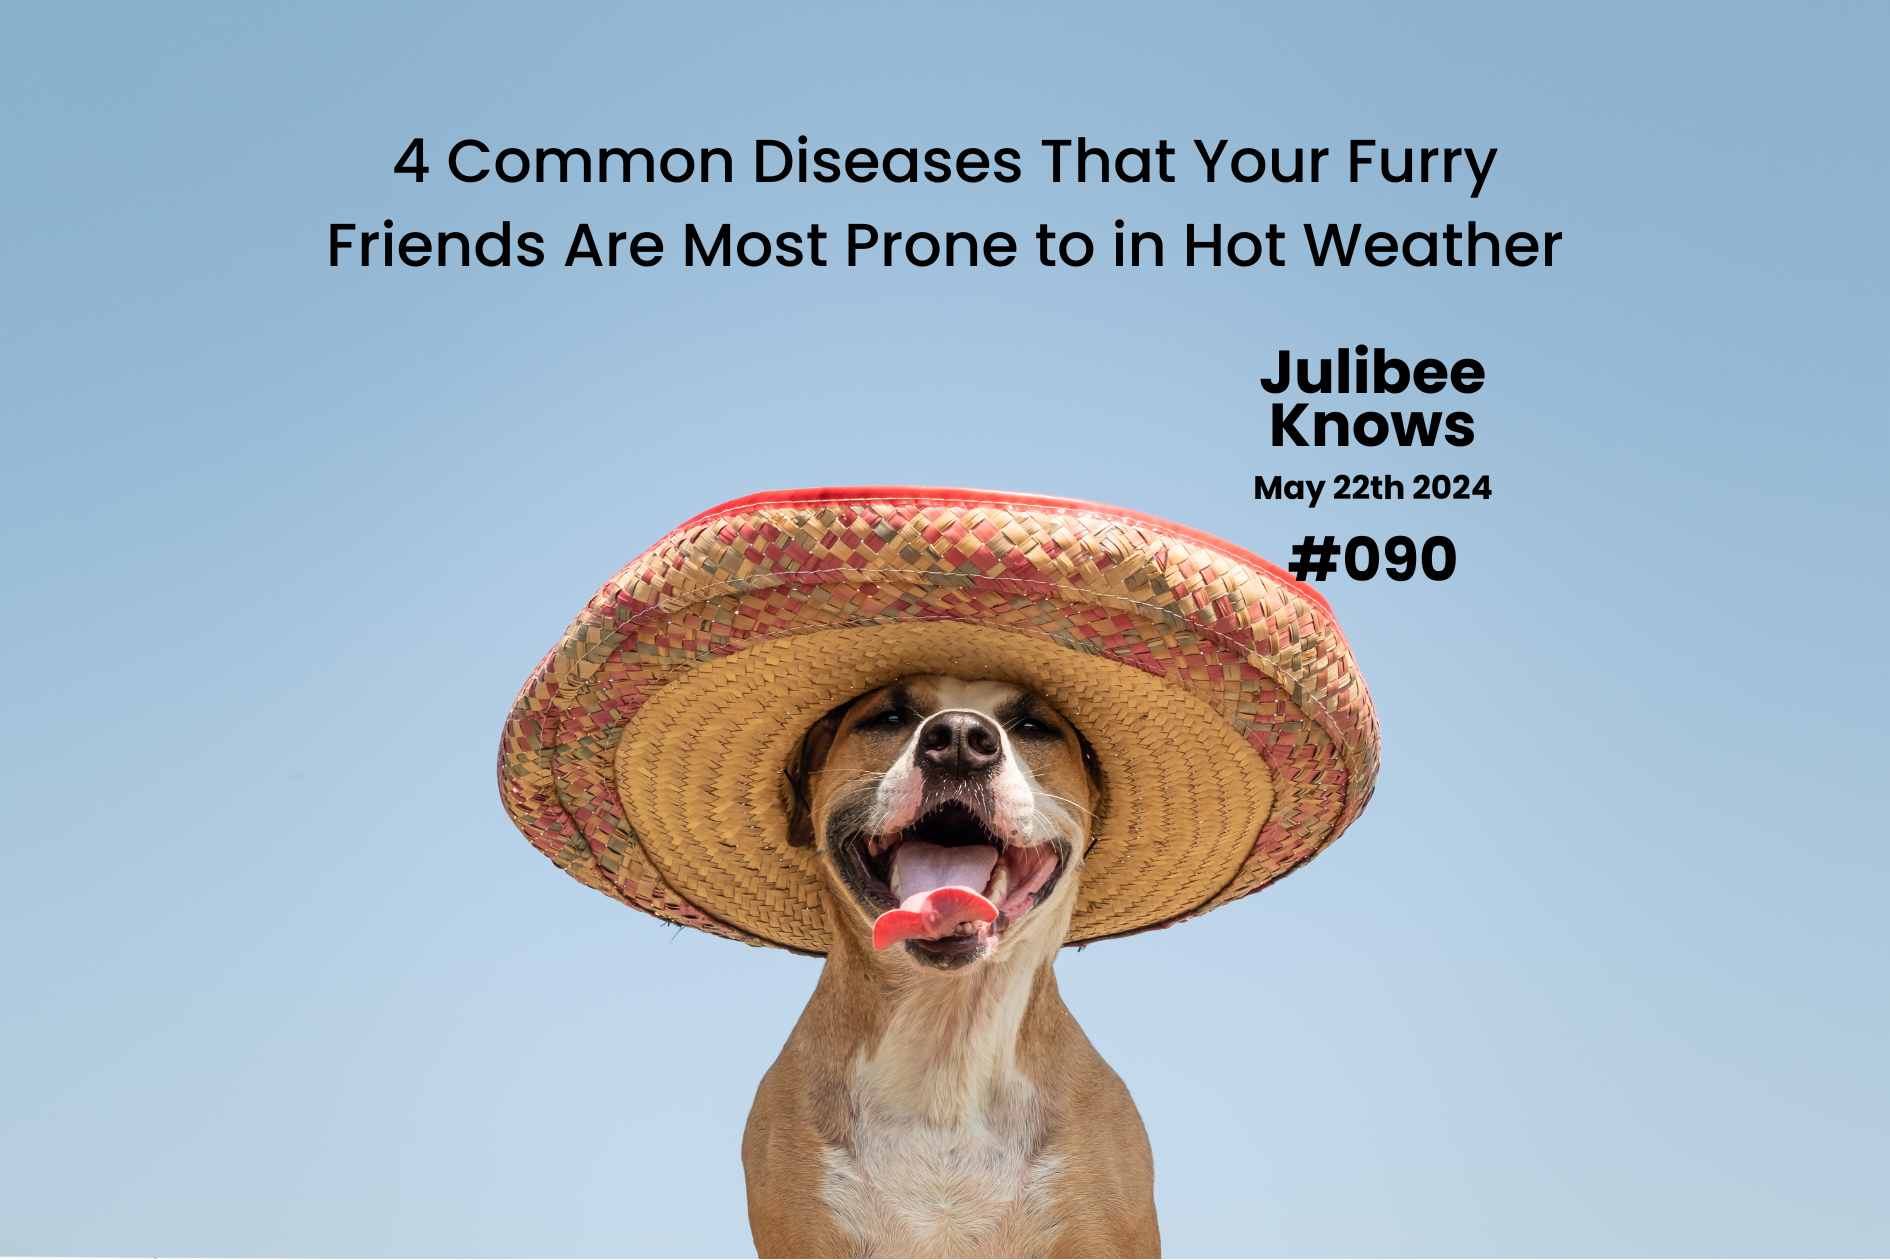 4 Common Diseases That Your Furry Friends Are Most Prone to in Hot Weather